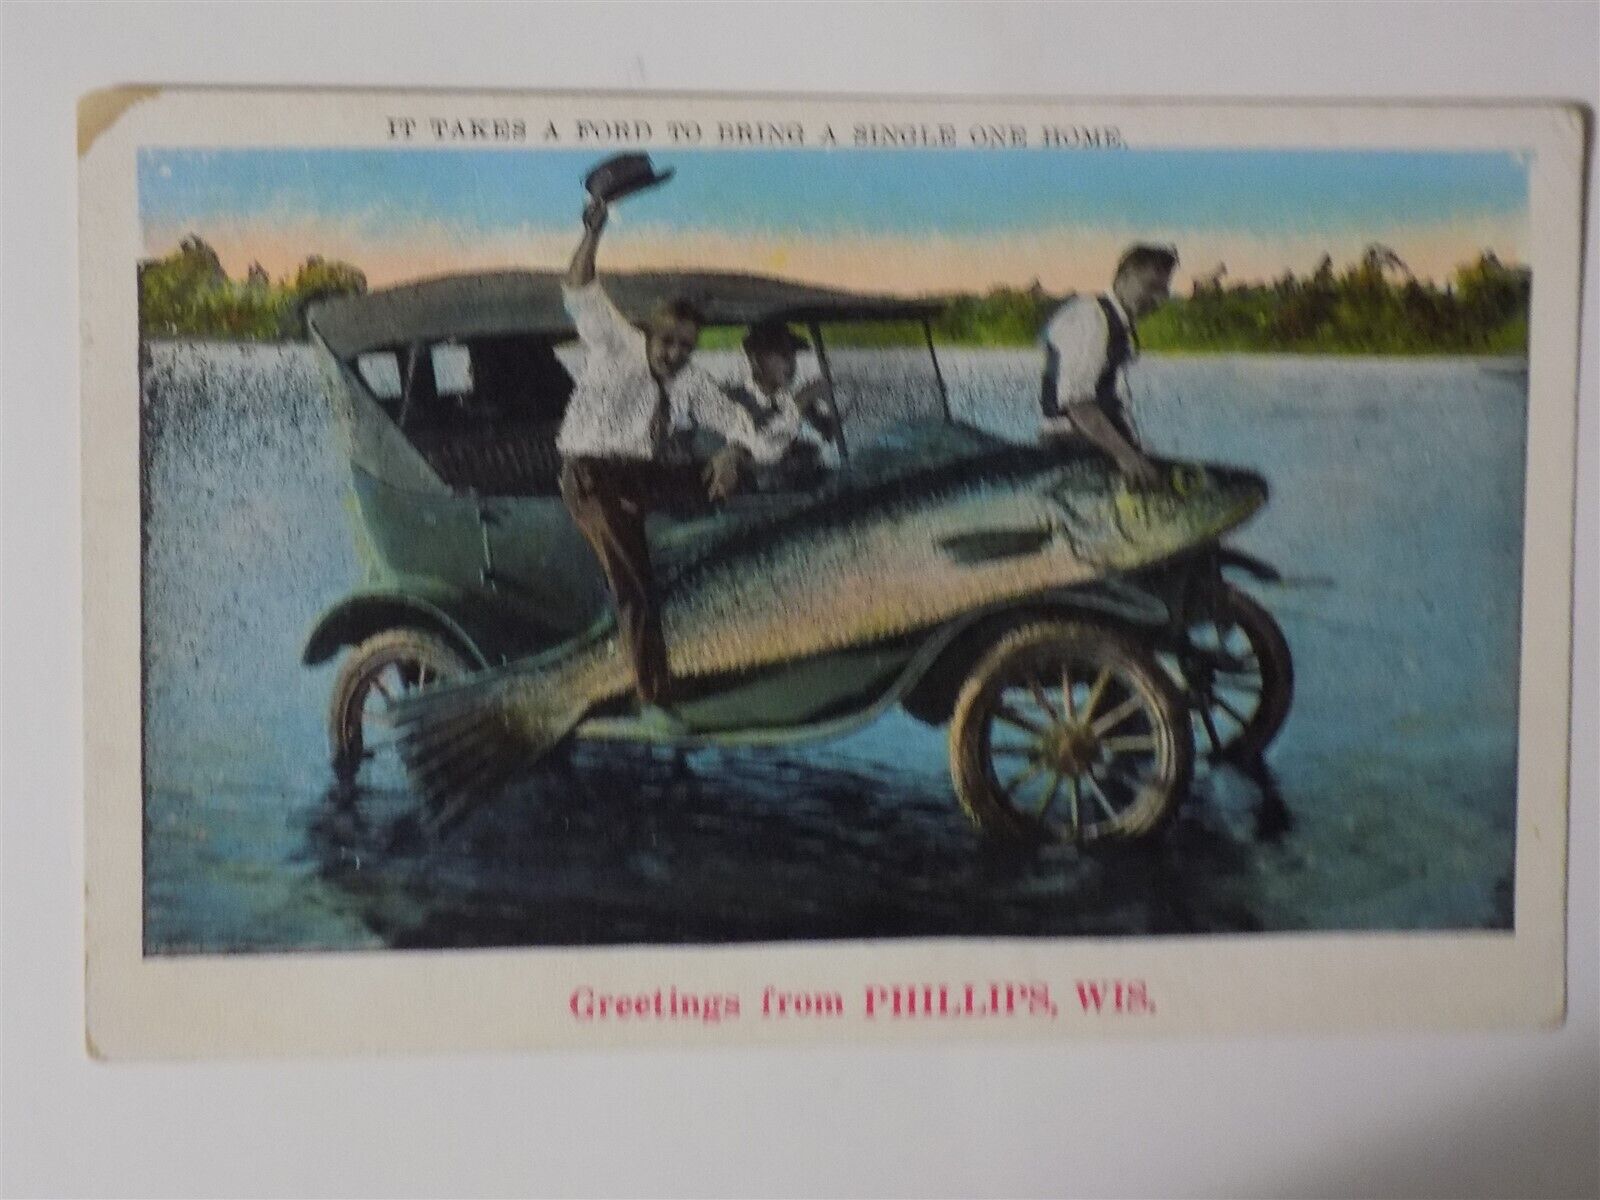 Phillips, Wisconsin WI ~ Greetings 1927 L747